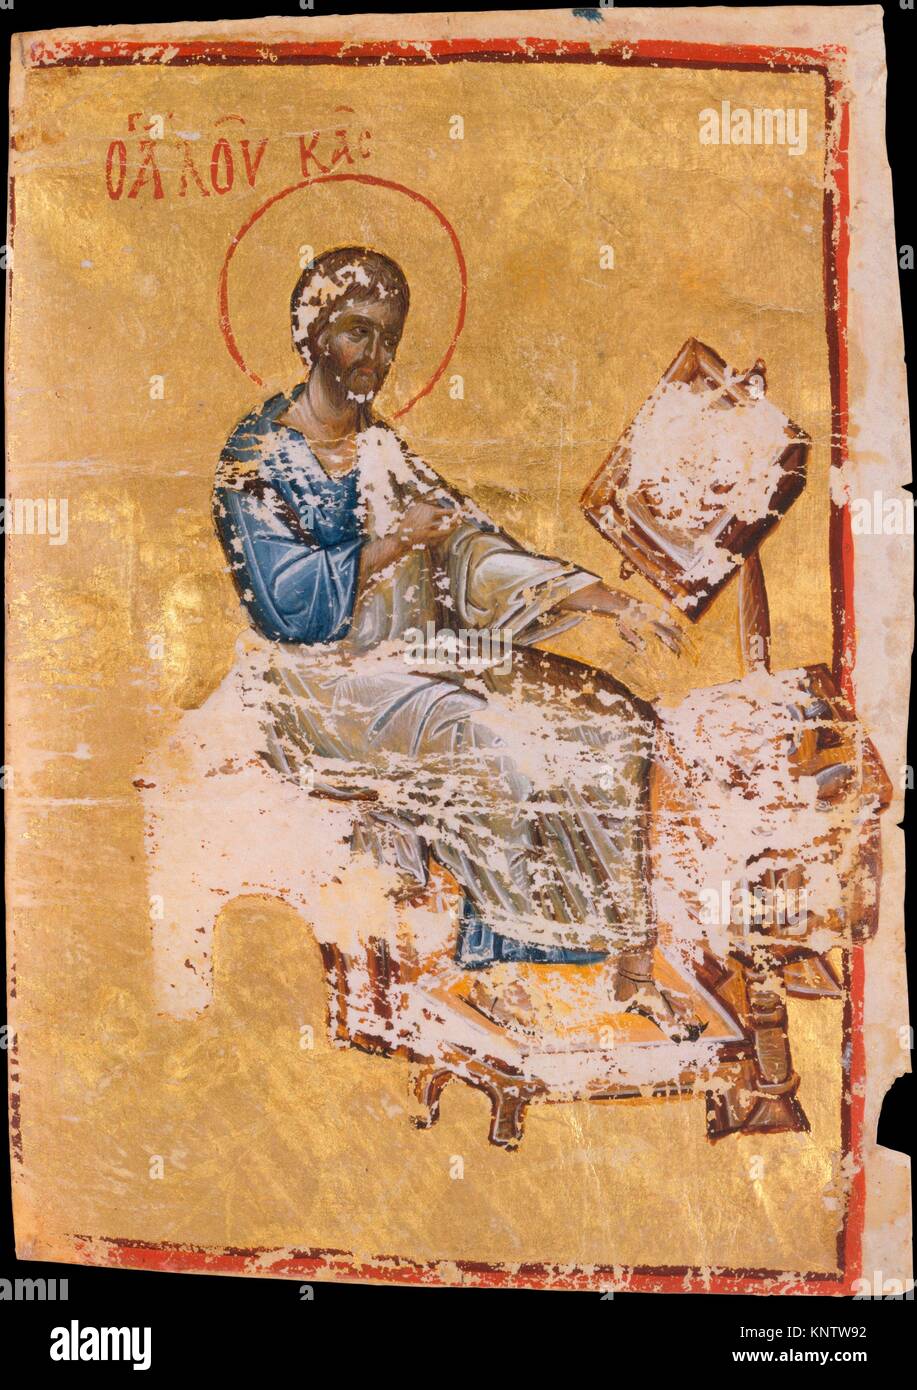 Manuscript Illumination with the Evangelist Luke. Date: late 13th-early 14th century; Culture: Byzantine; Medium: Tempera and gold on parchment; Stock Photo